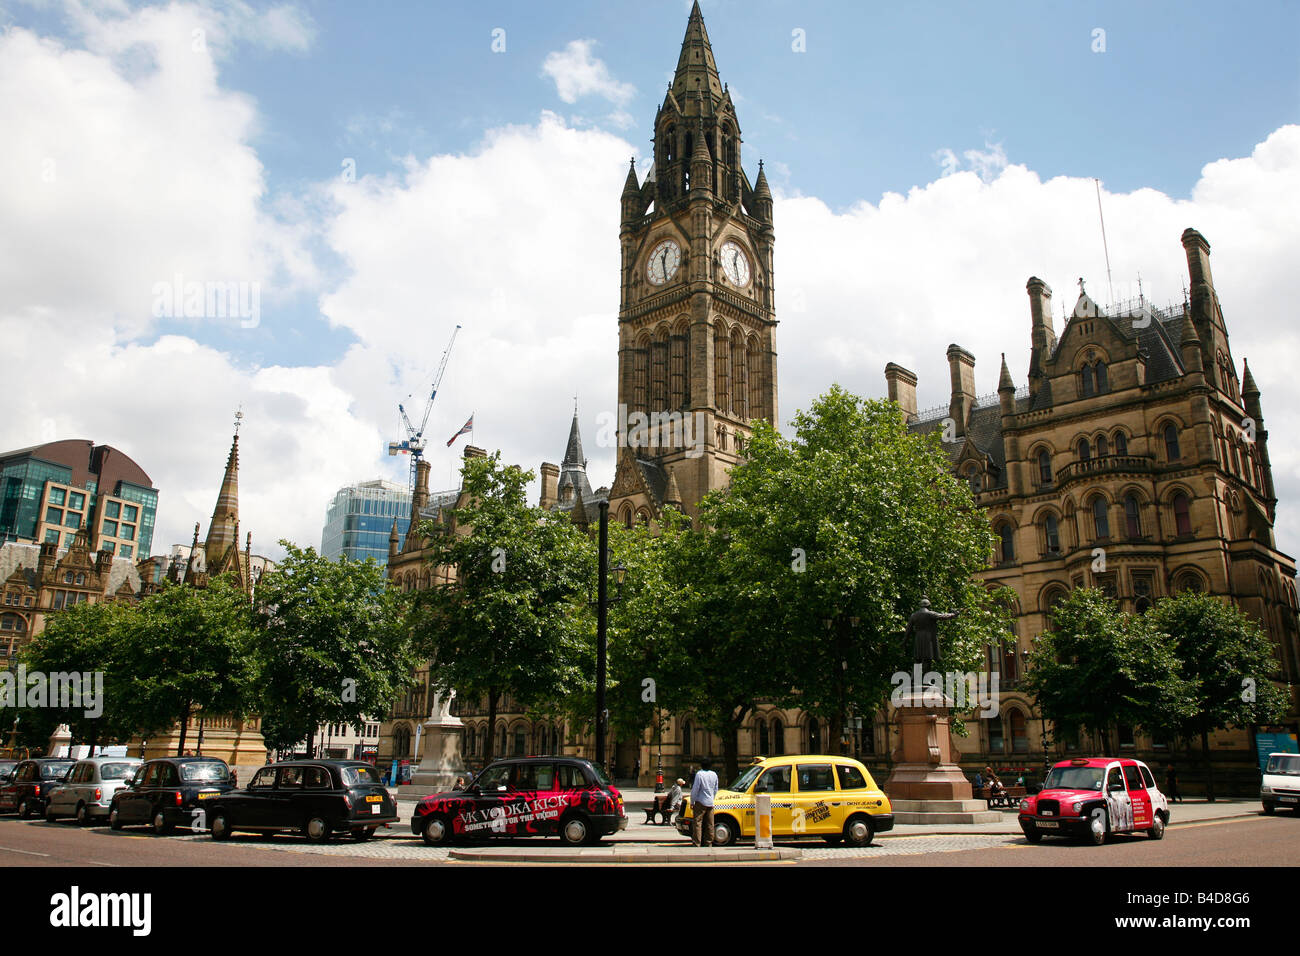 Aug 2008 - Manchester City Town Hall am Albert square Manchester England UK Stockfoto